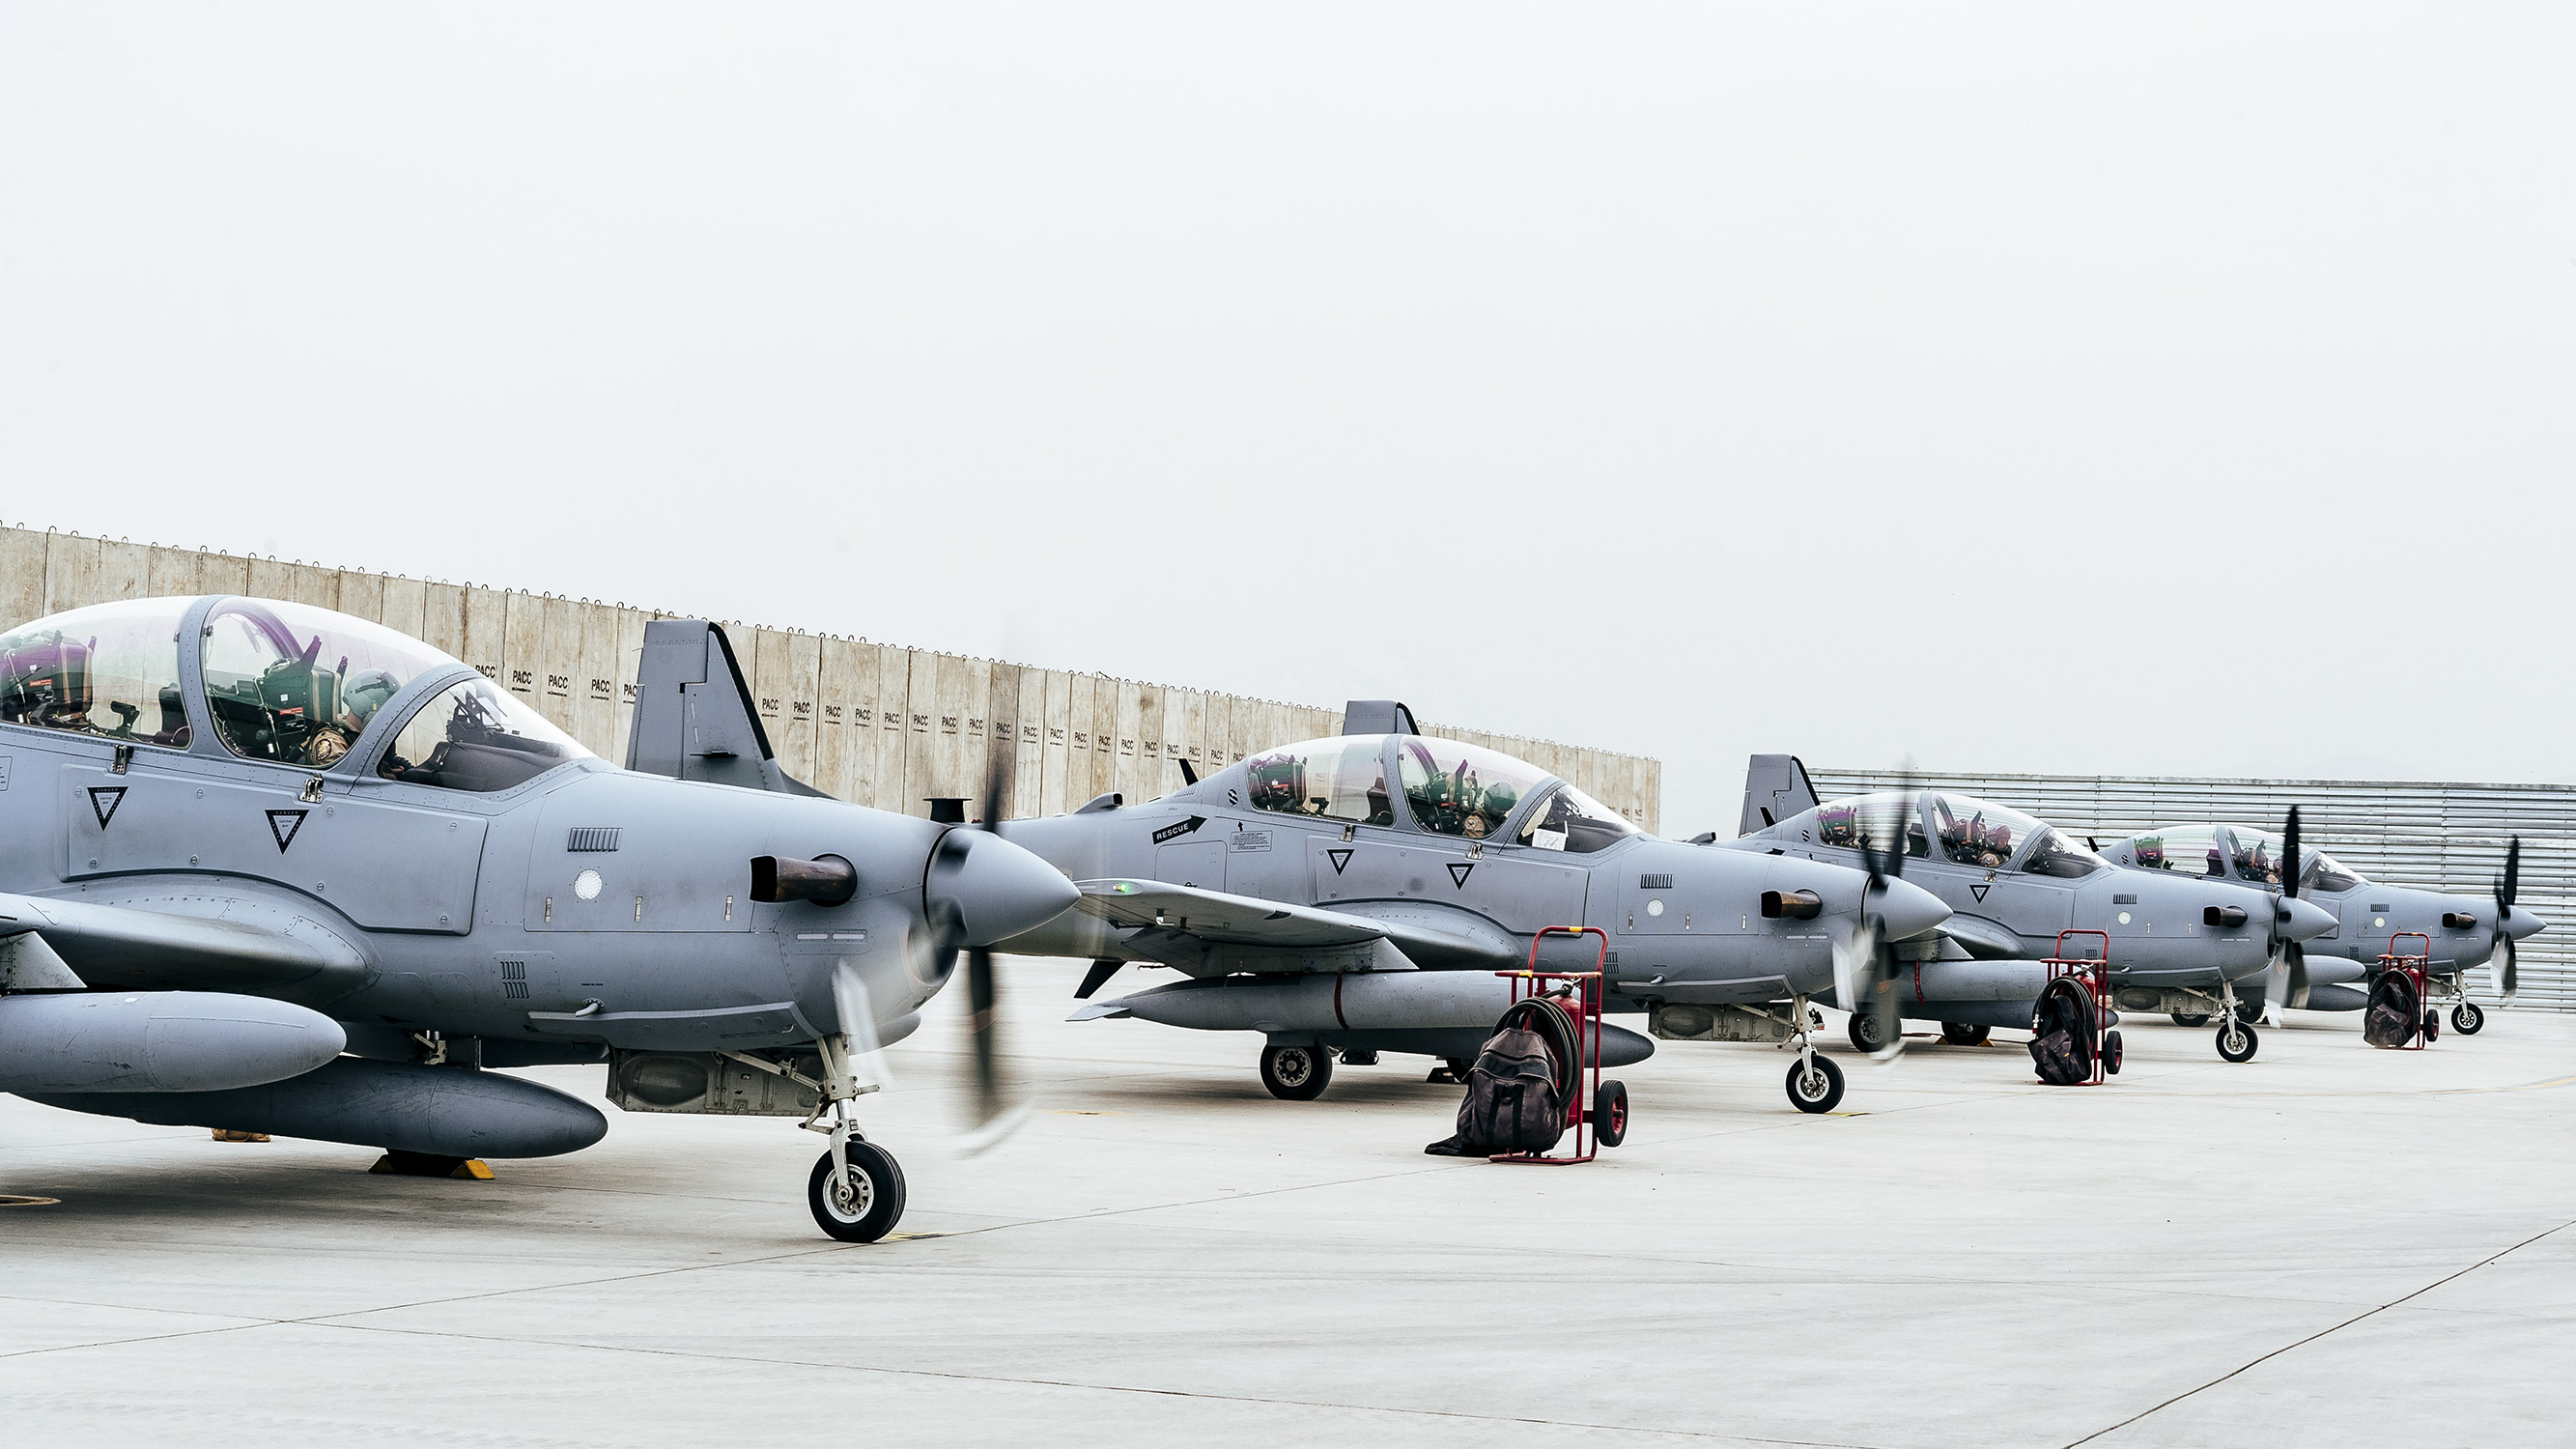 A-29 Super Tucanos arrive in Afghanistan